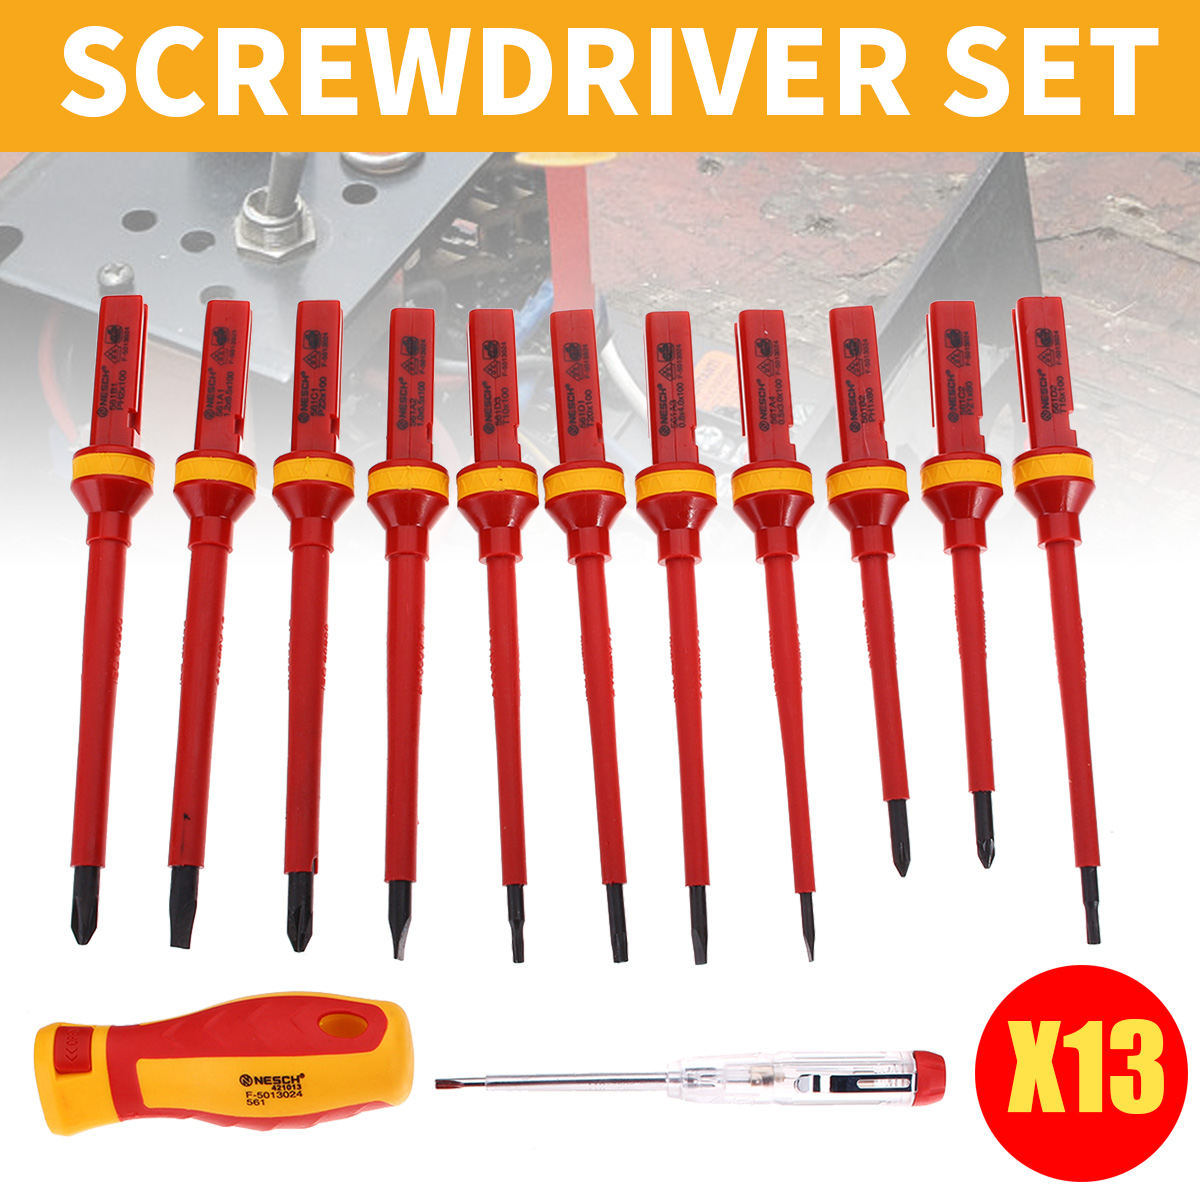 13Pcs-1000V-Electronic-Insulated-Screwdriver-Set-Phillips-Slotted-Torx-CR-V-Screwdriver-Hand-Tools-1224521-2